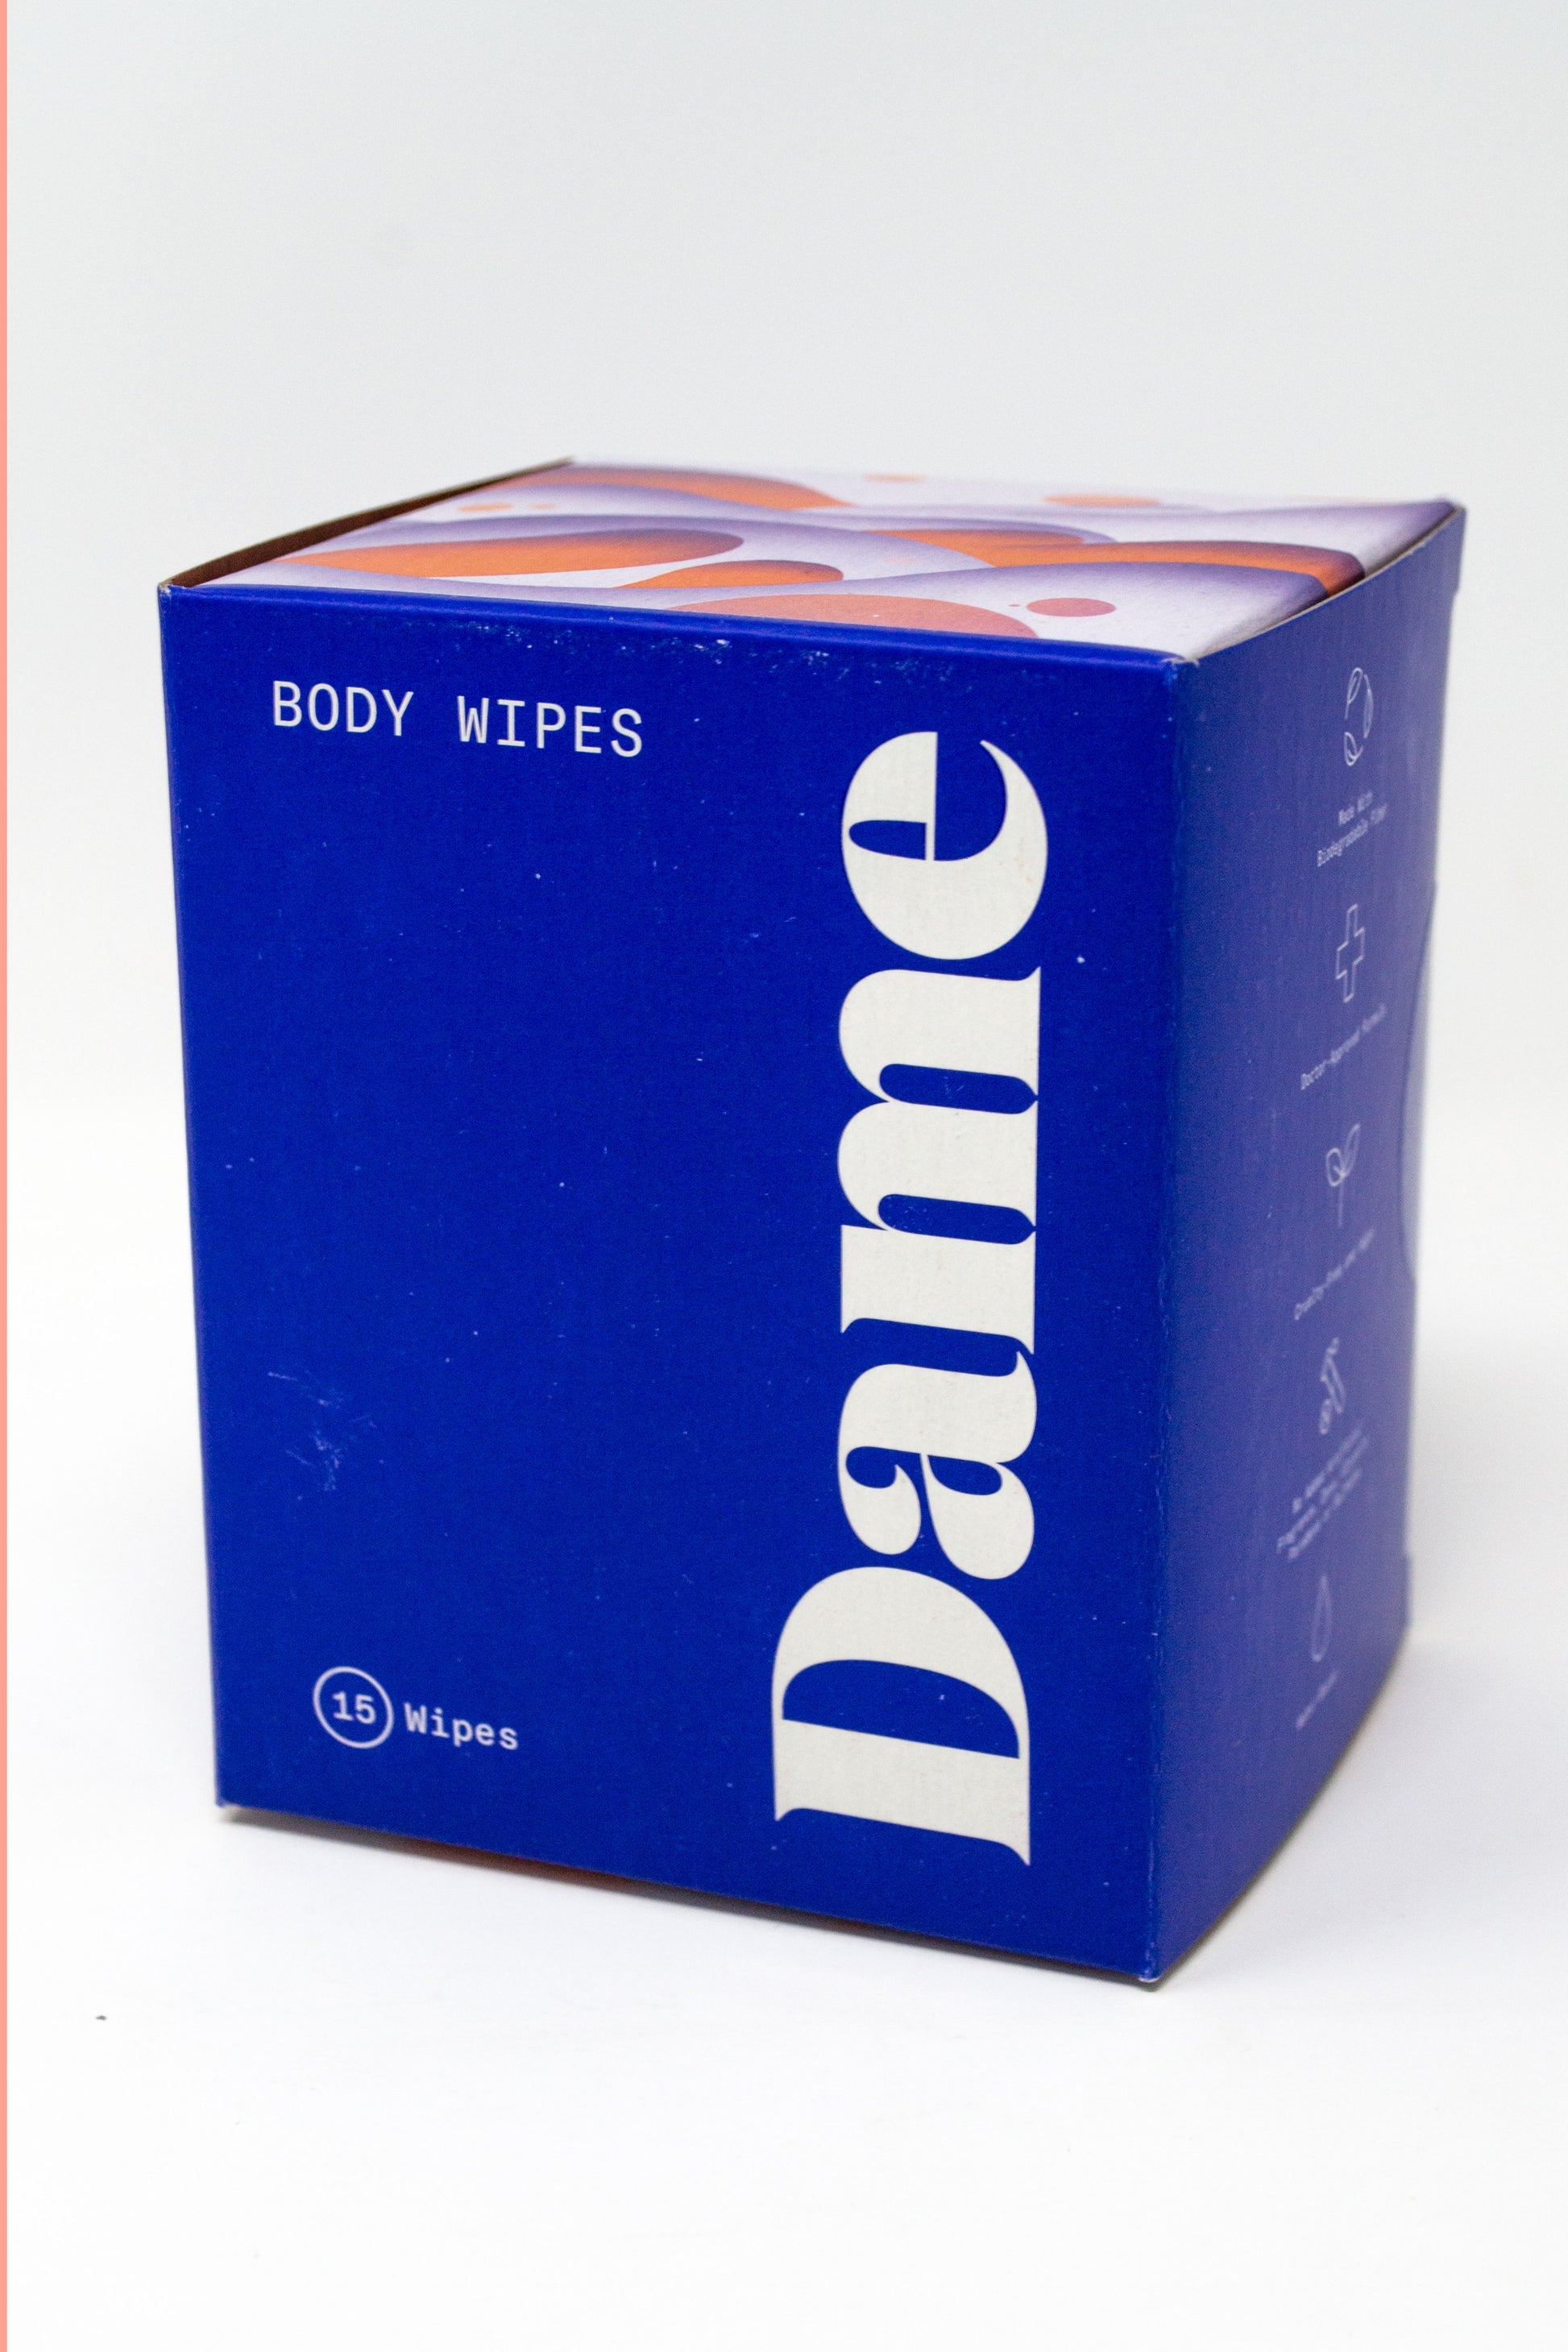 Dame Body Wipes Sachets 15 Count - XOXTOYS